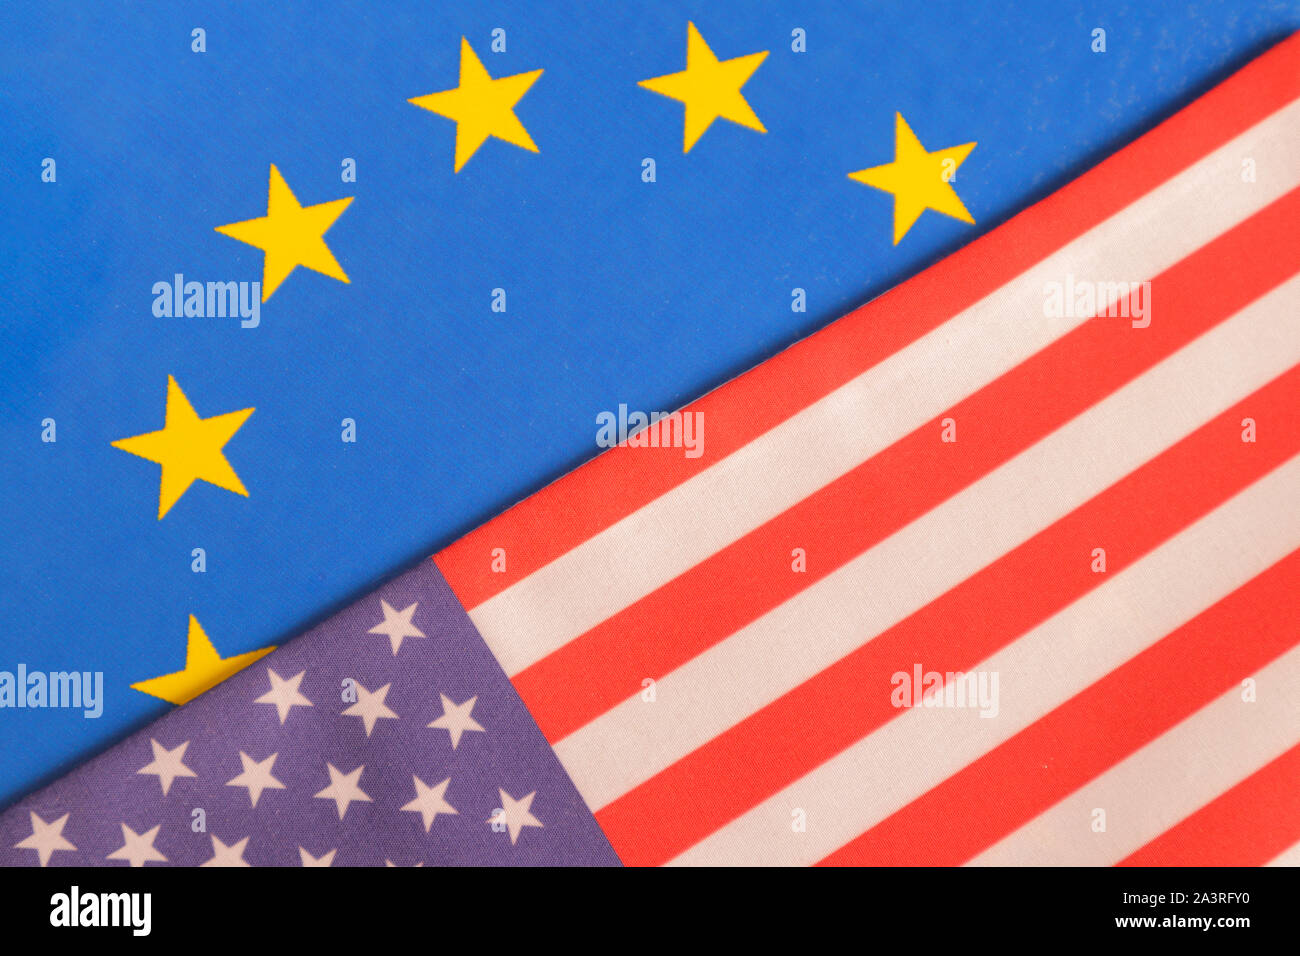 Concept of Bilateral relations of EU or European Union showing with flags. Stock Photo